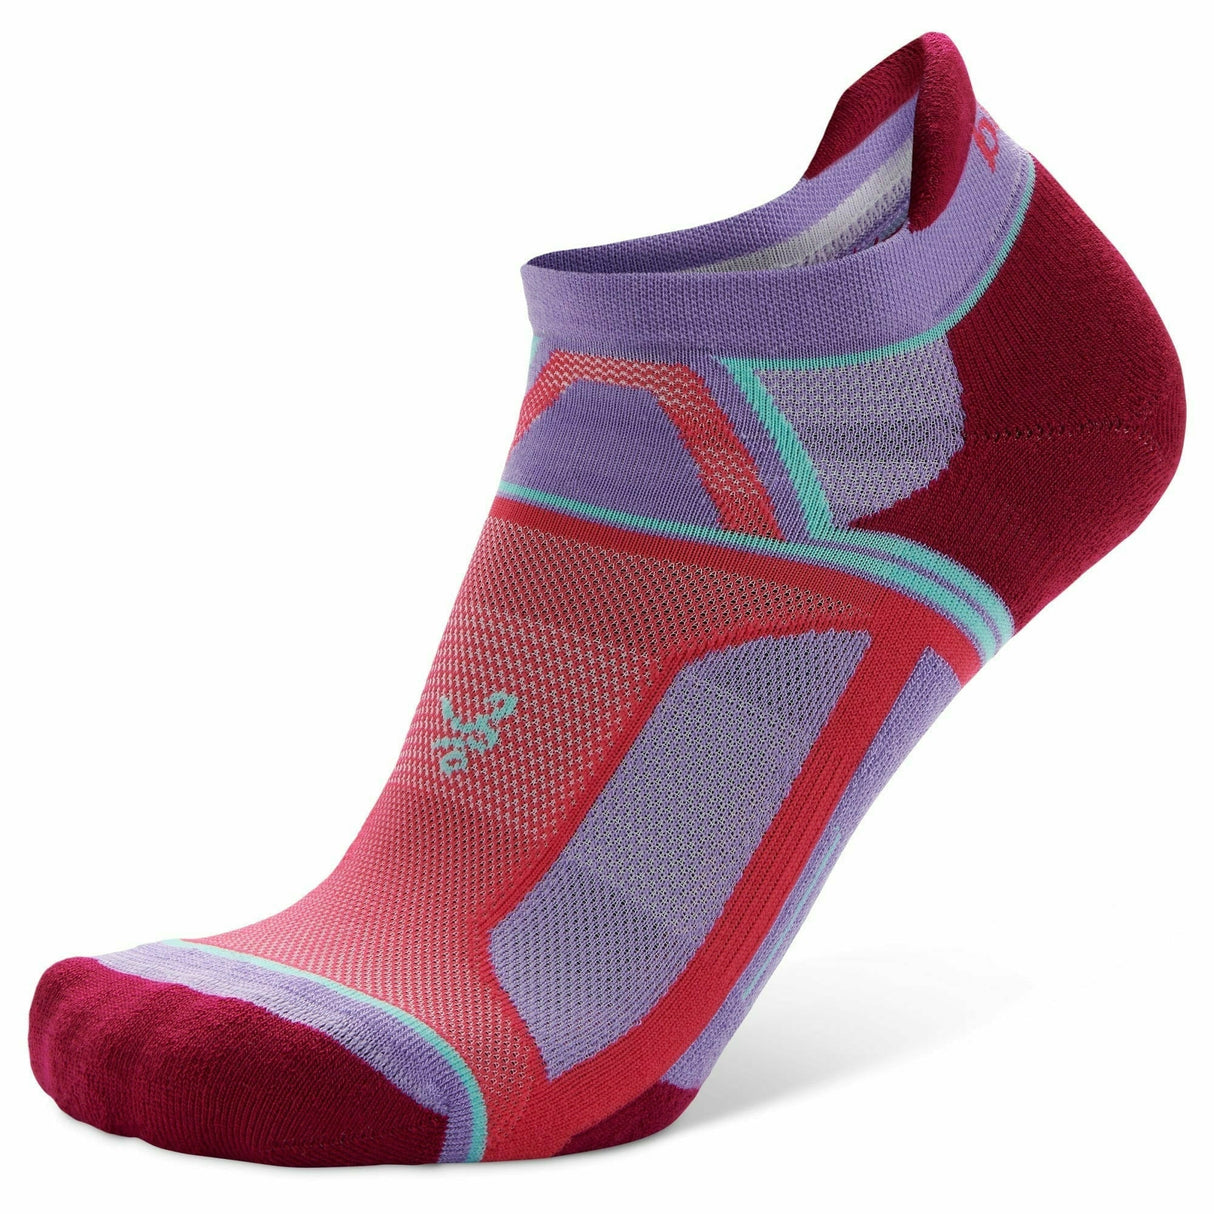 Balega Hidden Contour Recycled No Show Socks  -  Small / Lavender/Pinkberry